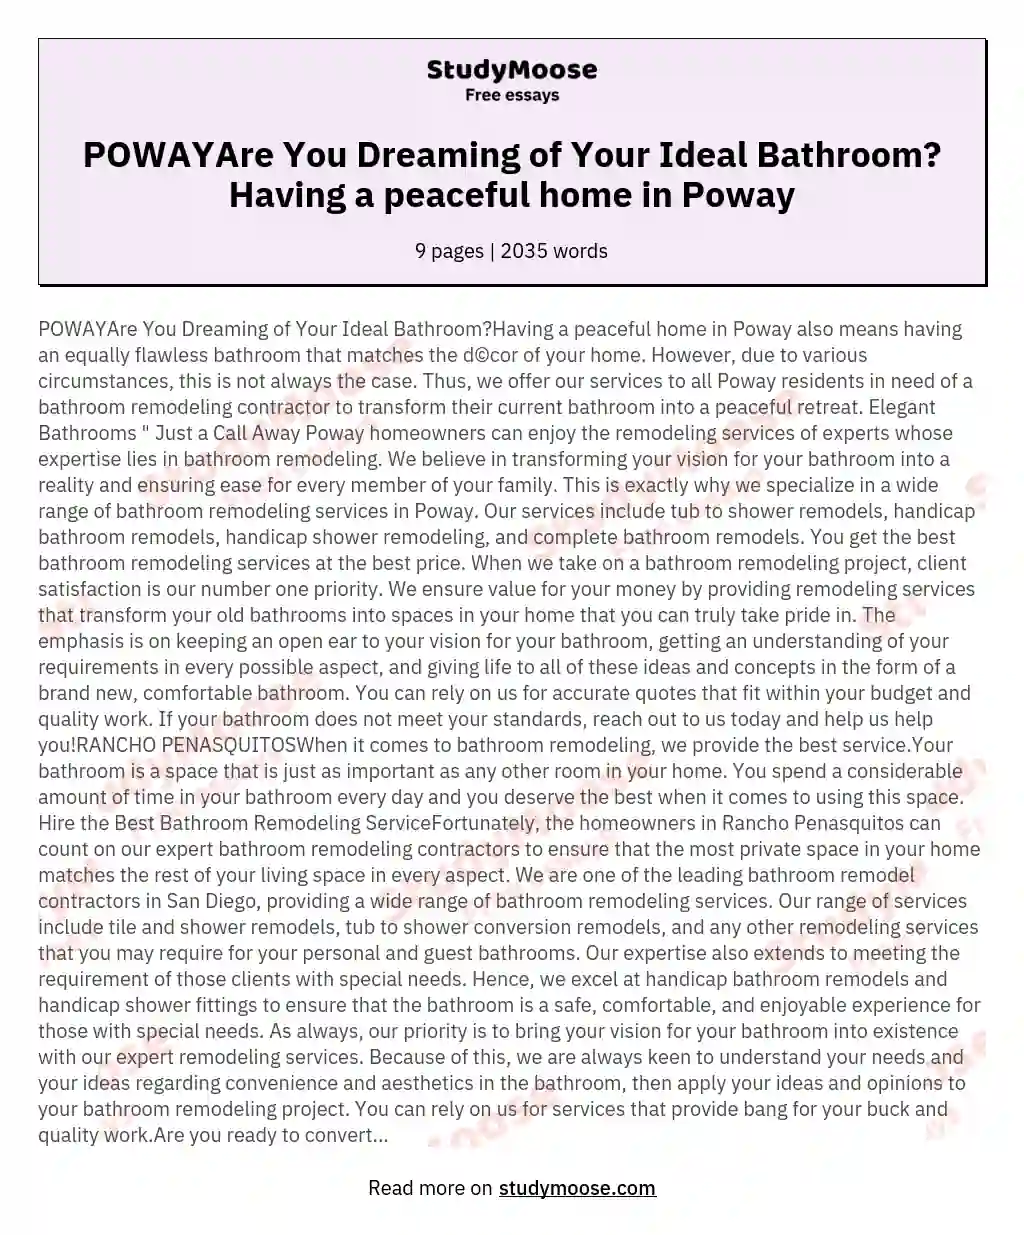 POWAYAre You Dreaming of Your Ideal Bathroom?Having a peaceful home in Poway essay